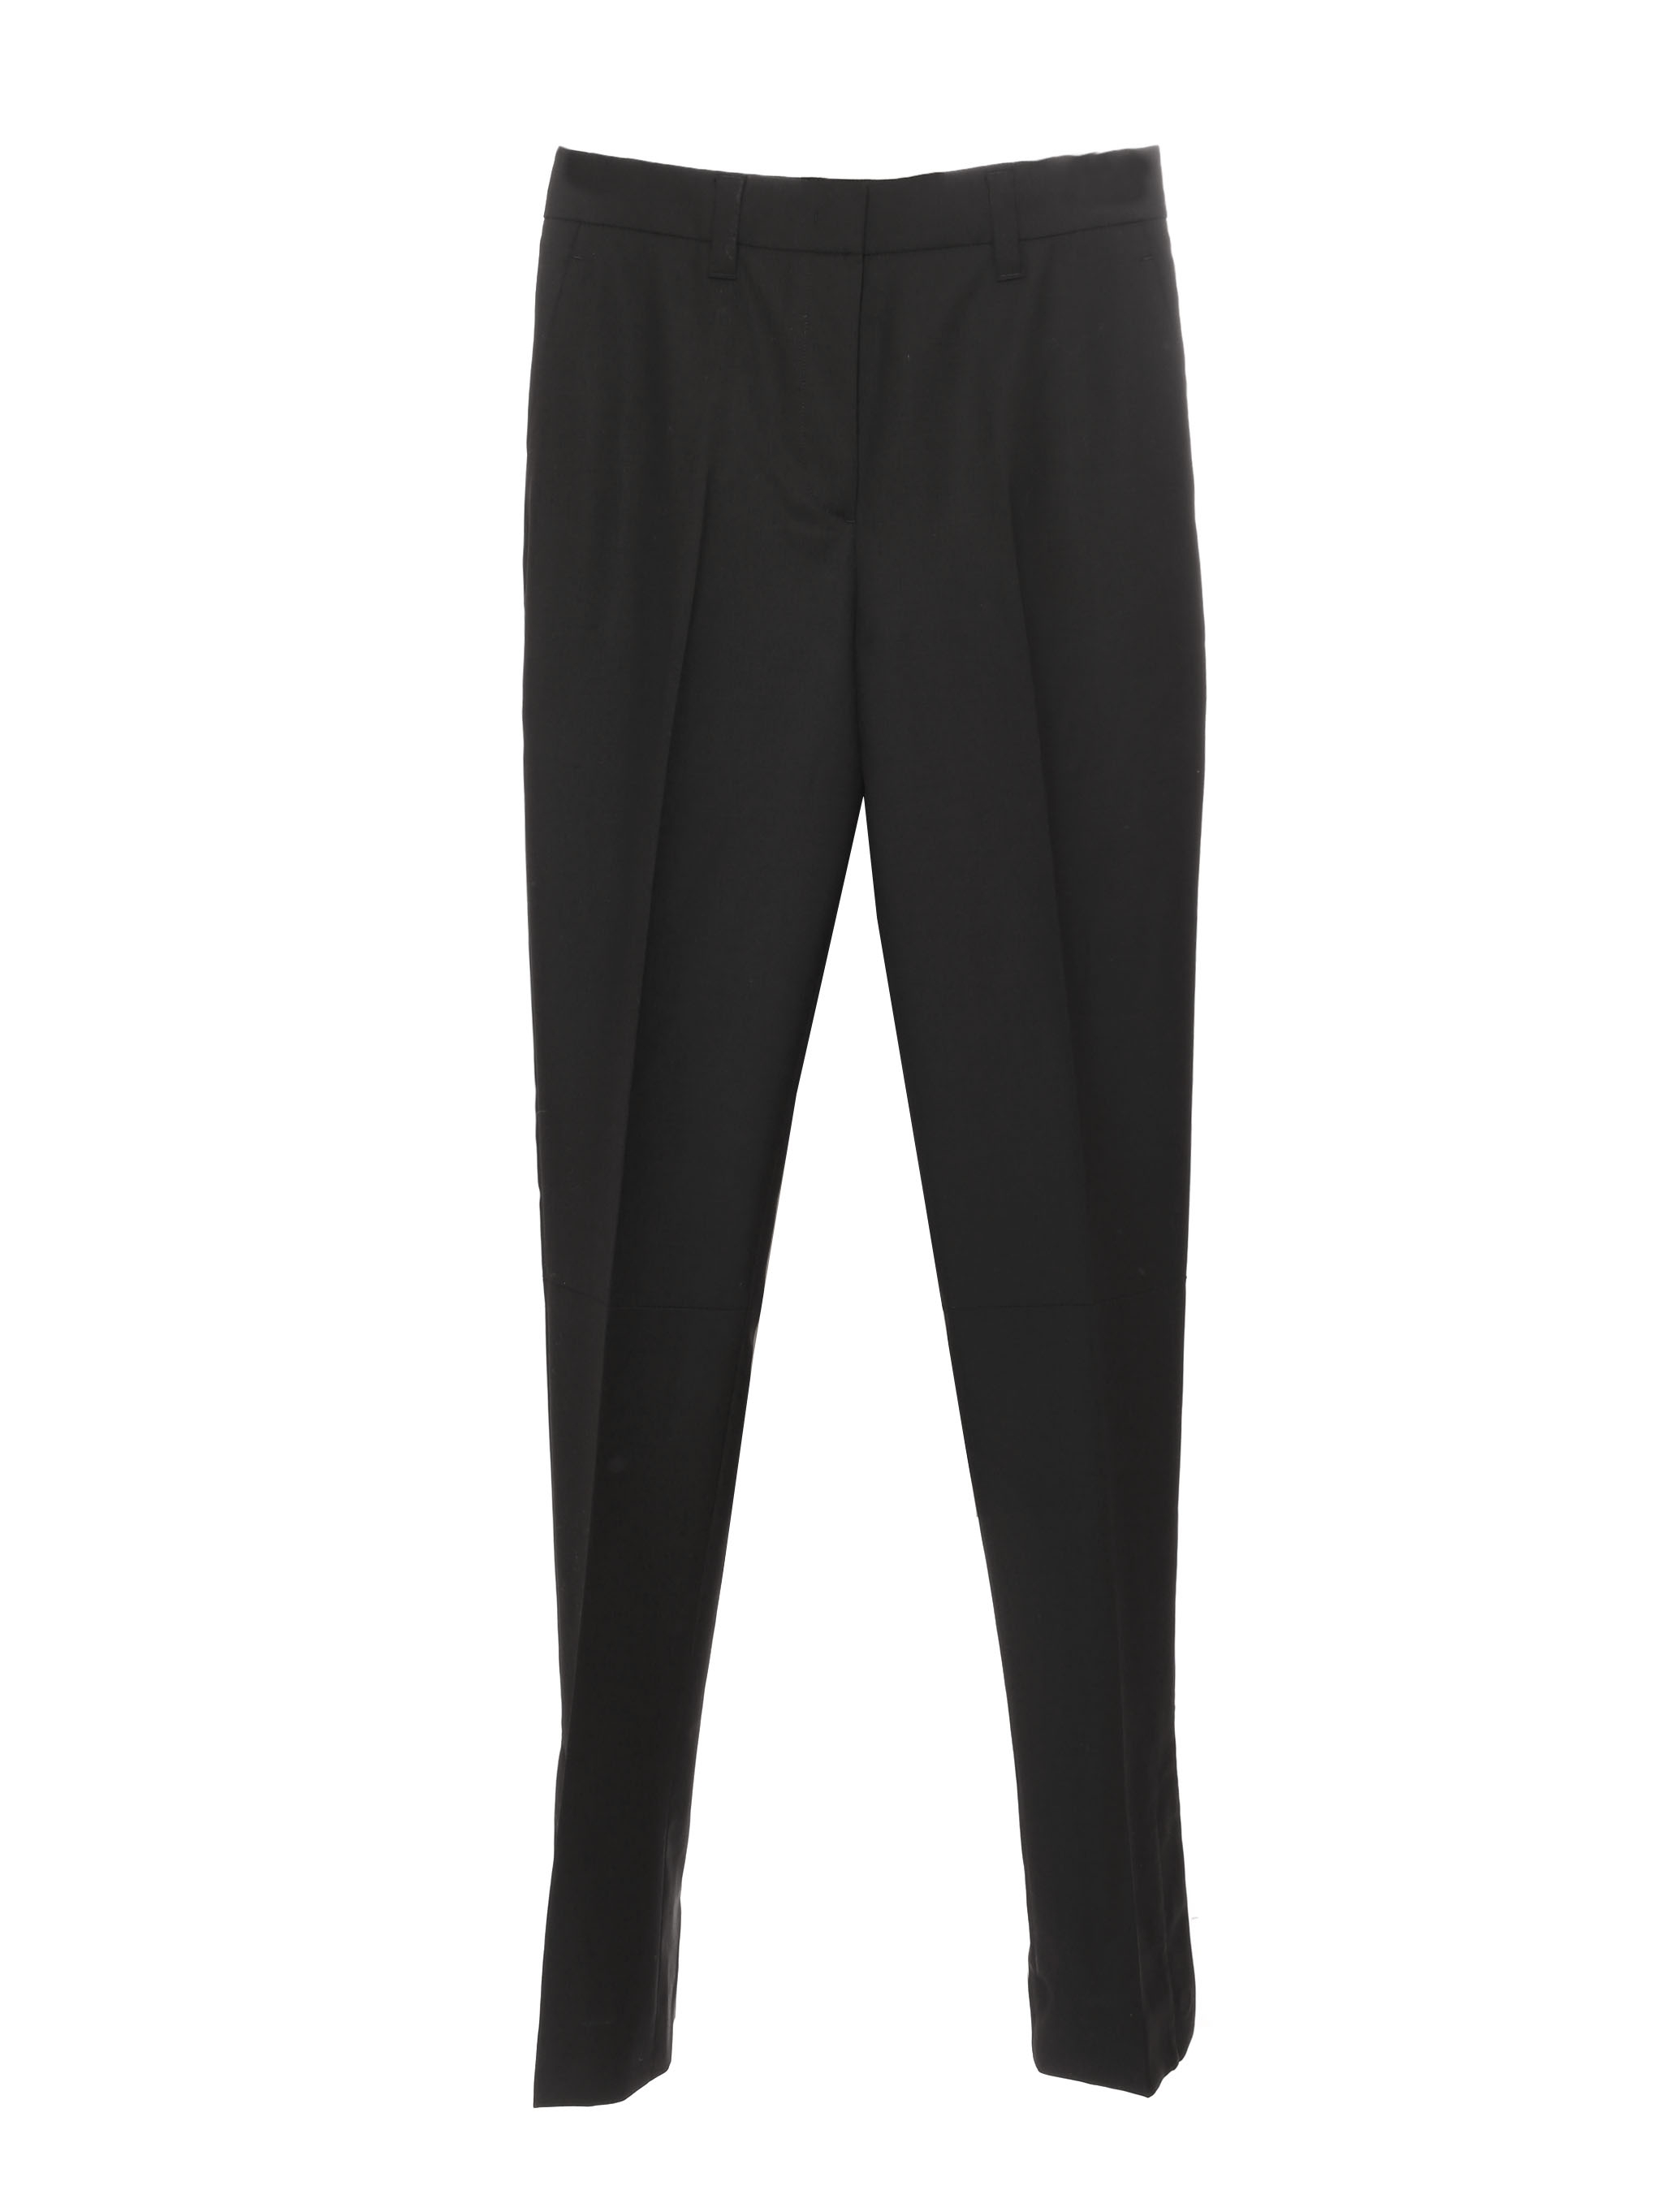 Boutique PRADA Black wool and mohair twill straight leg pants with